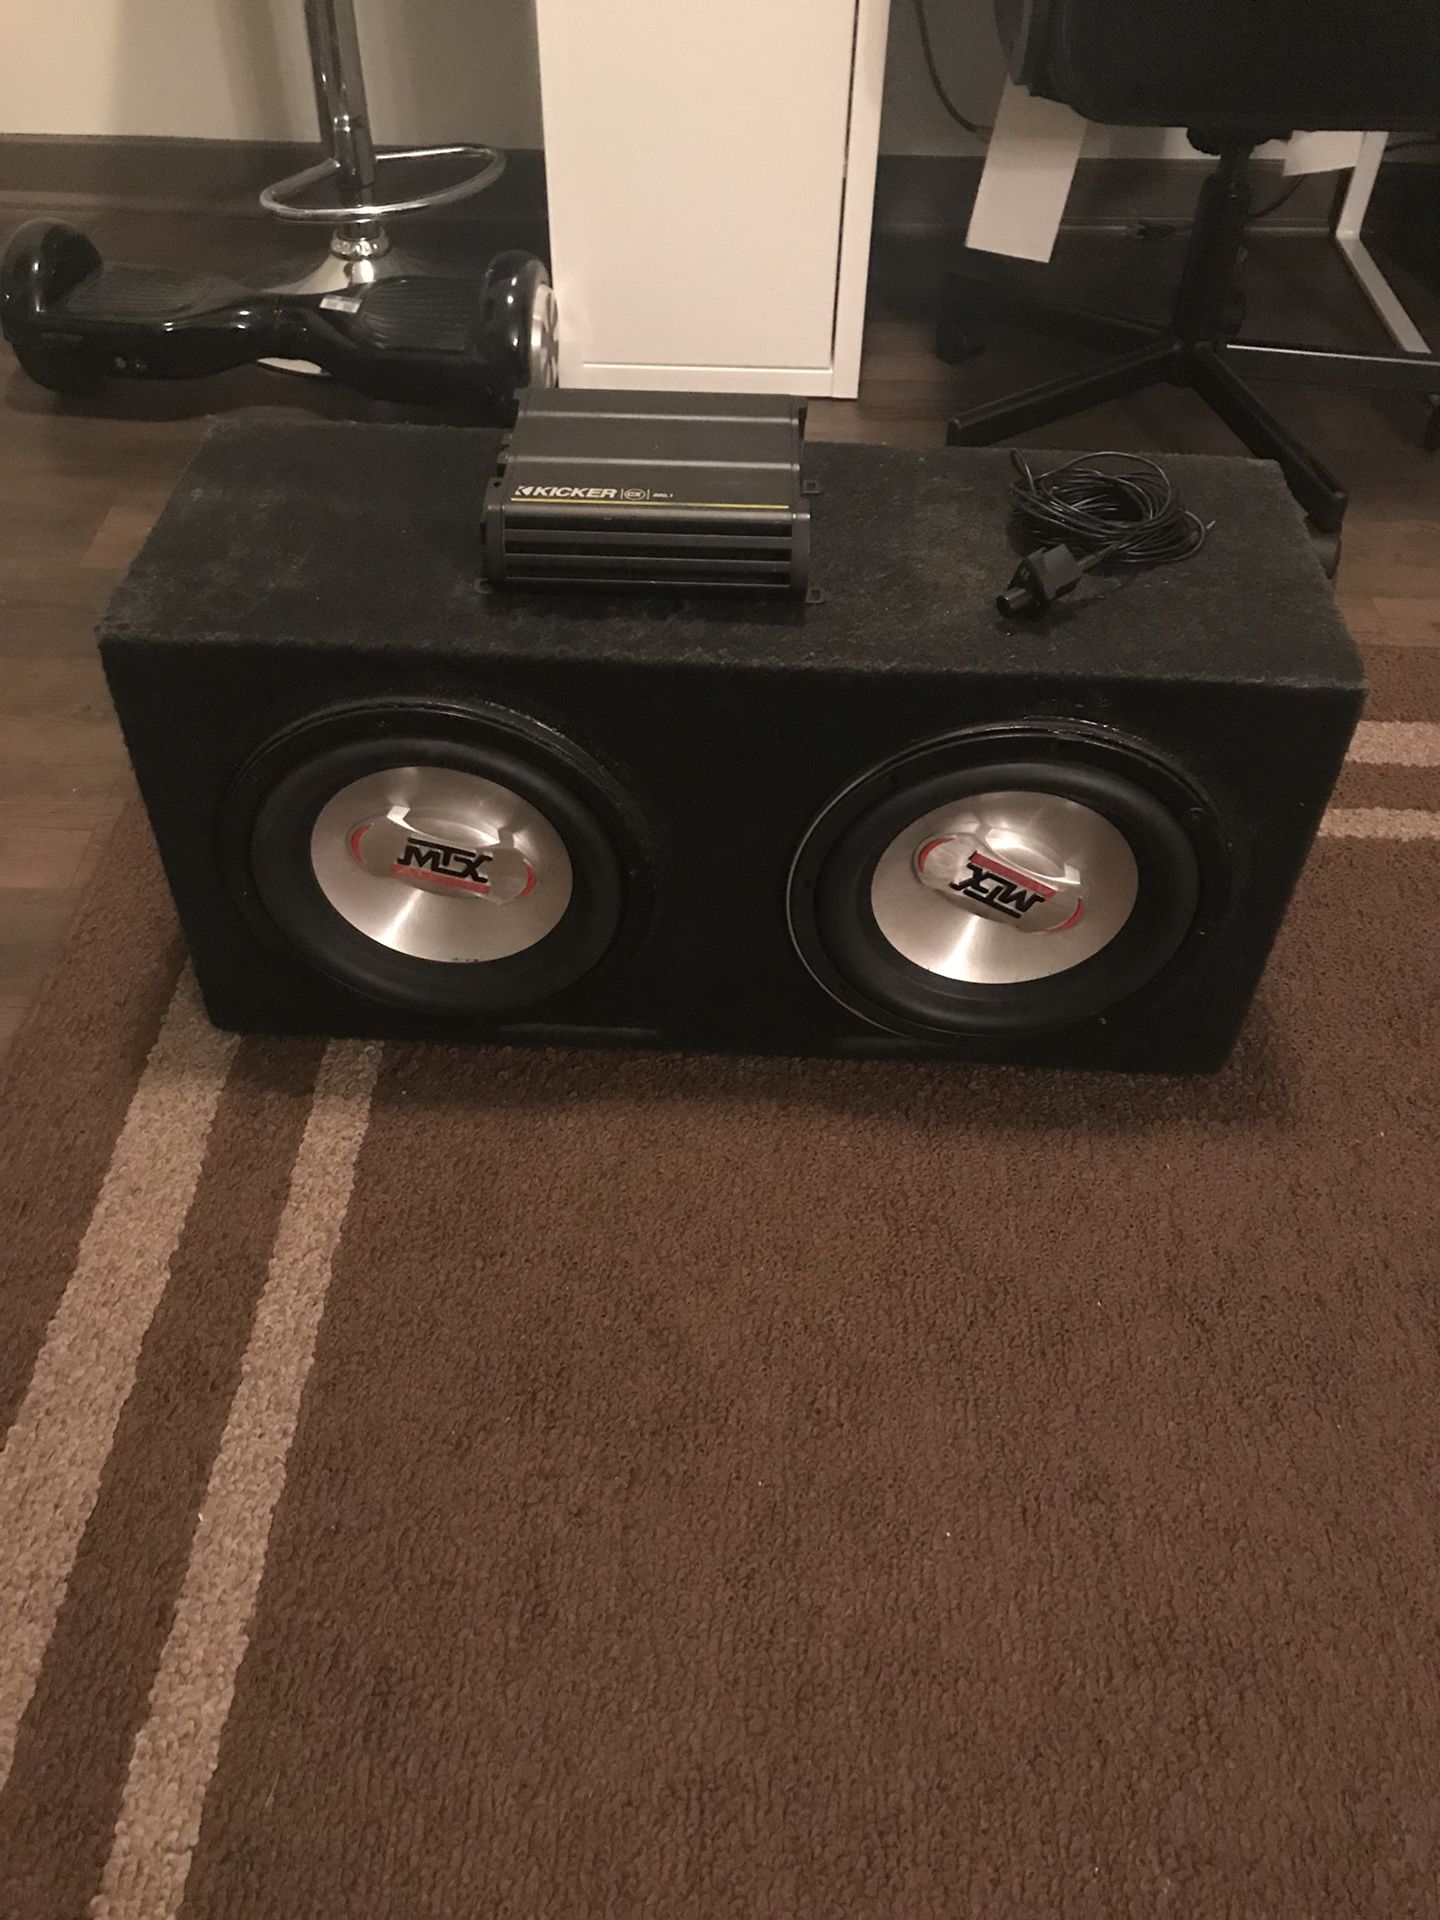 2 10” MTX Subwoofers in sealed carpeted enclosure including 600.1 kicker amp